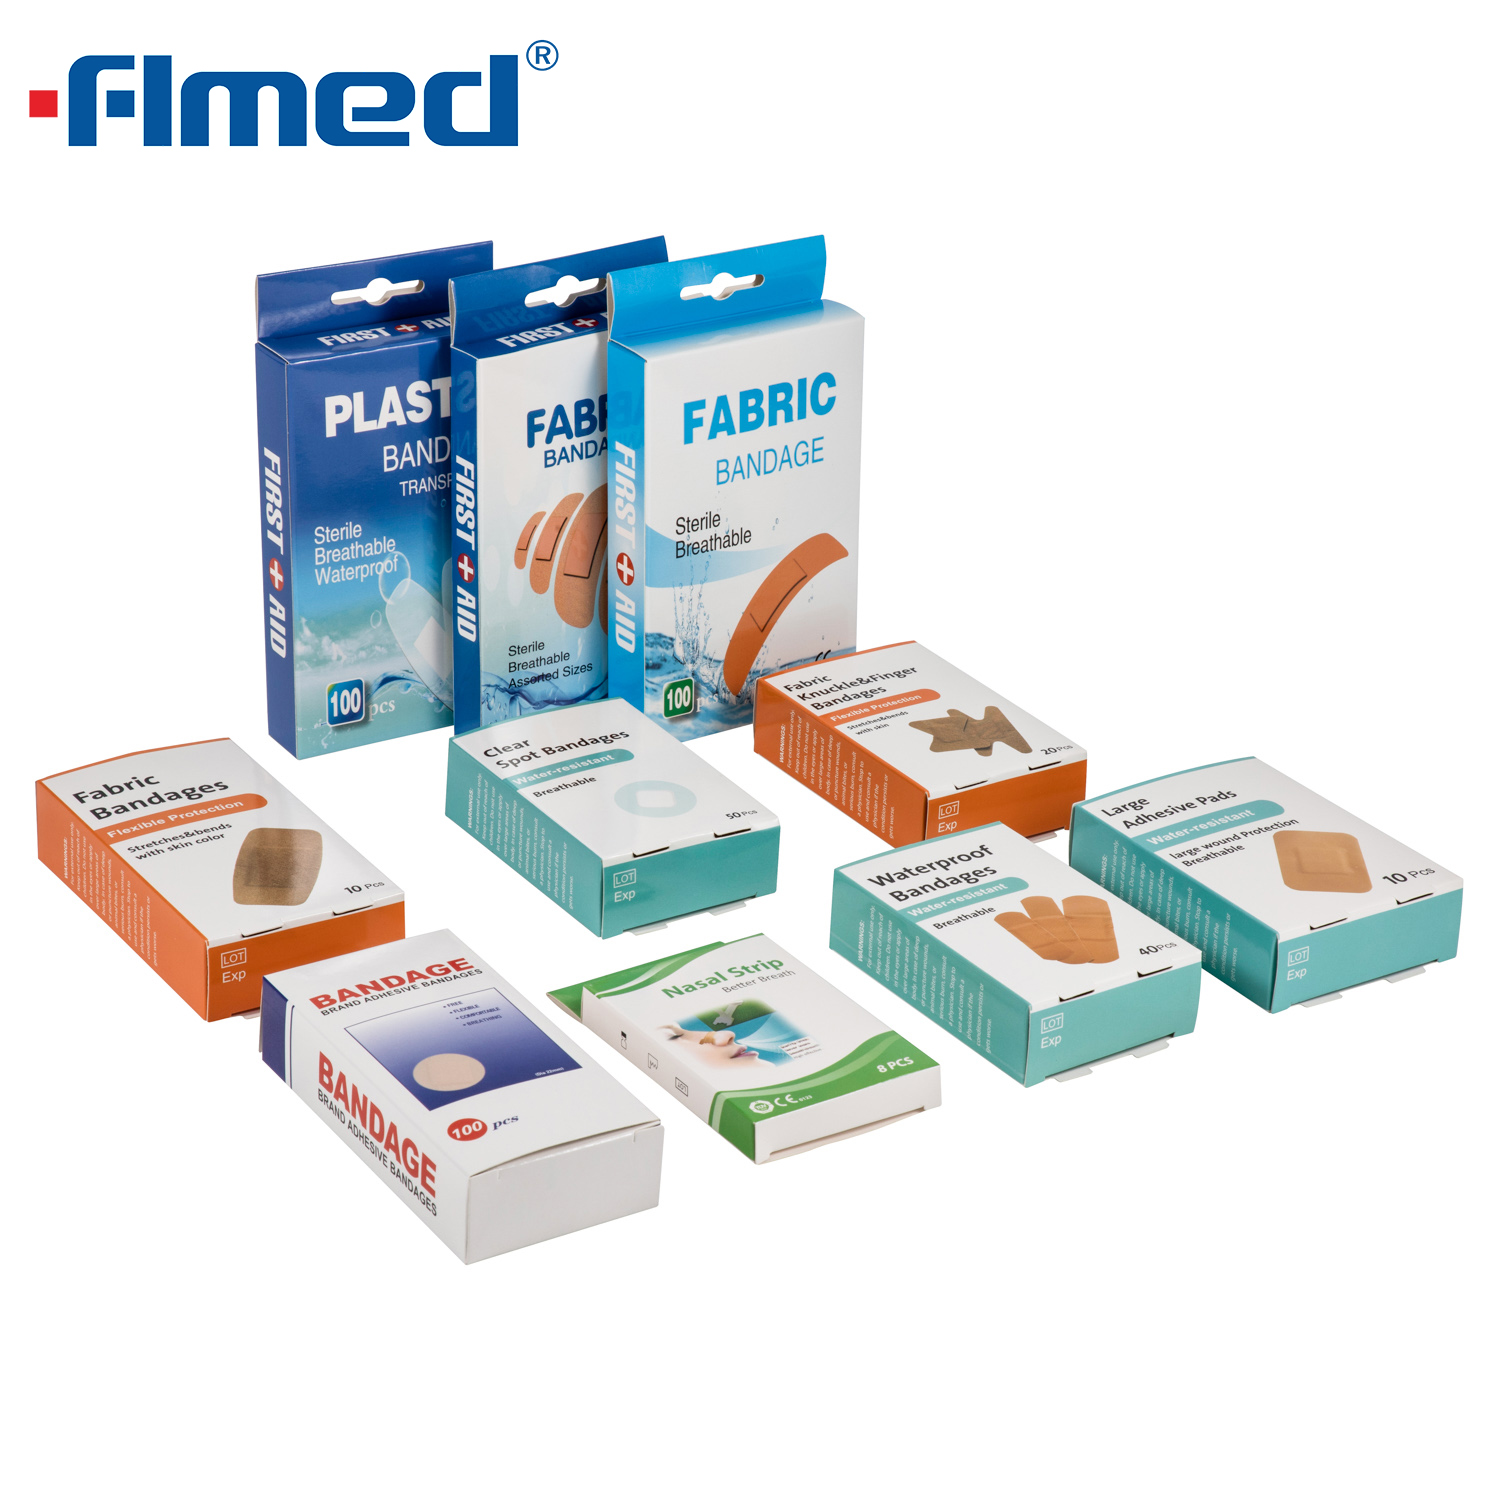 Aidplast Mixed First Aid Plaster